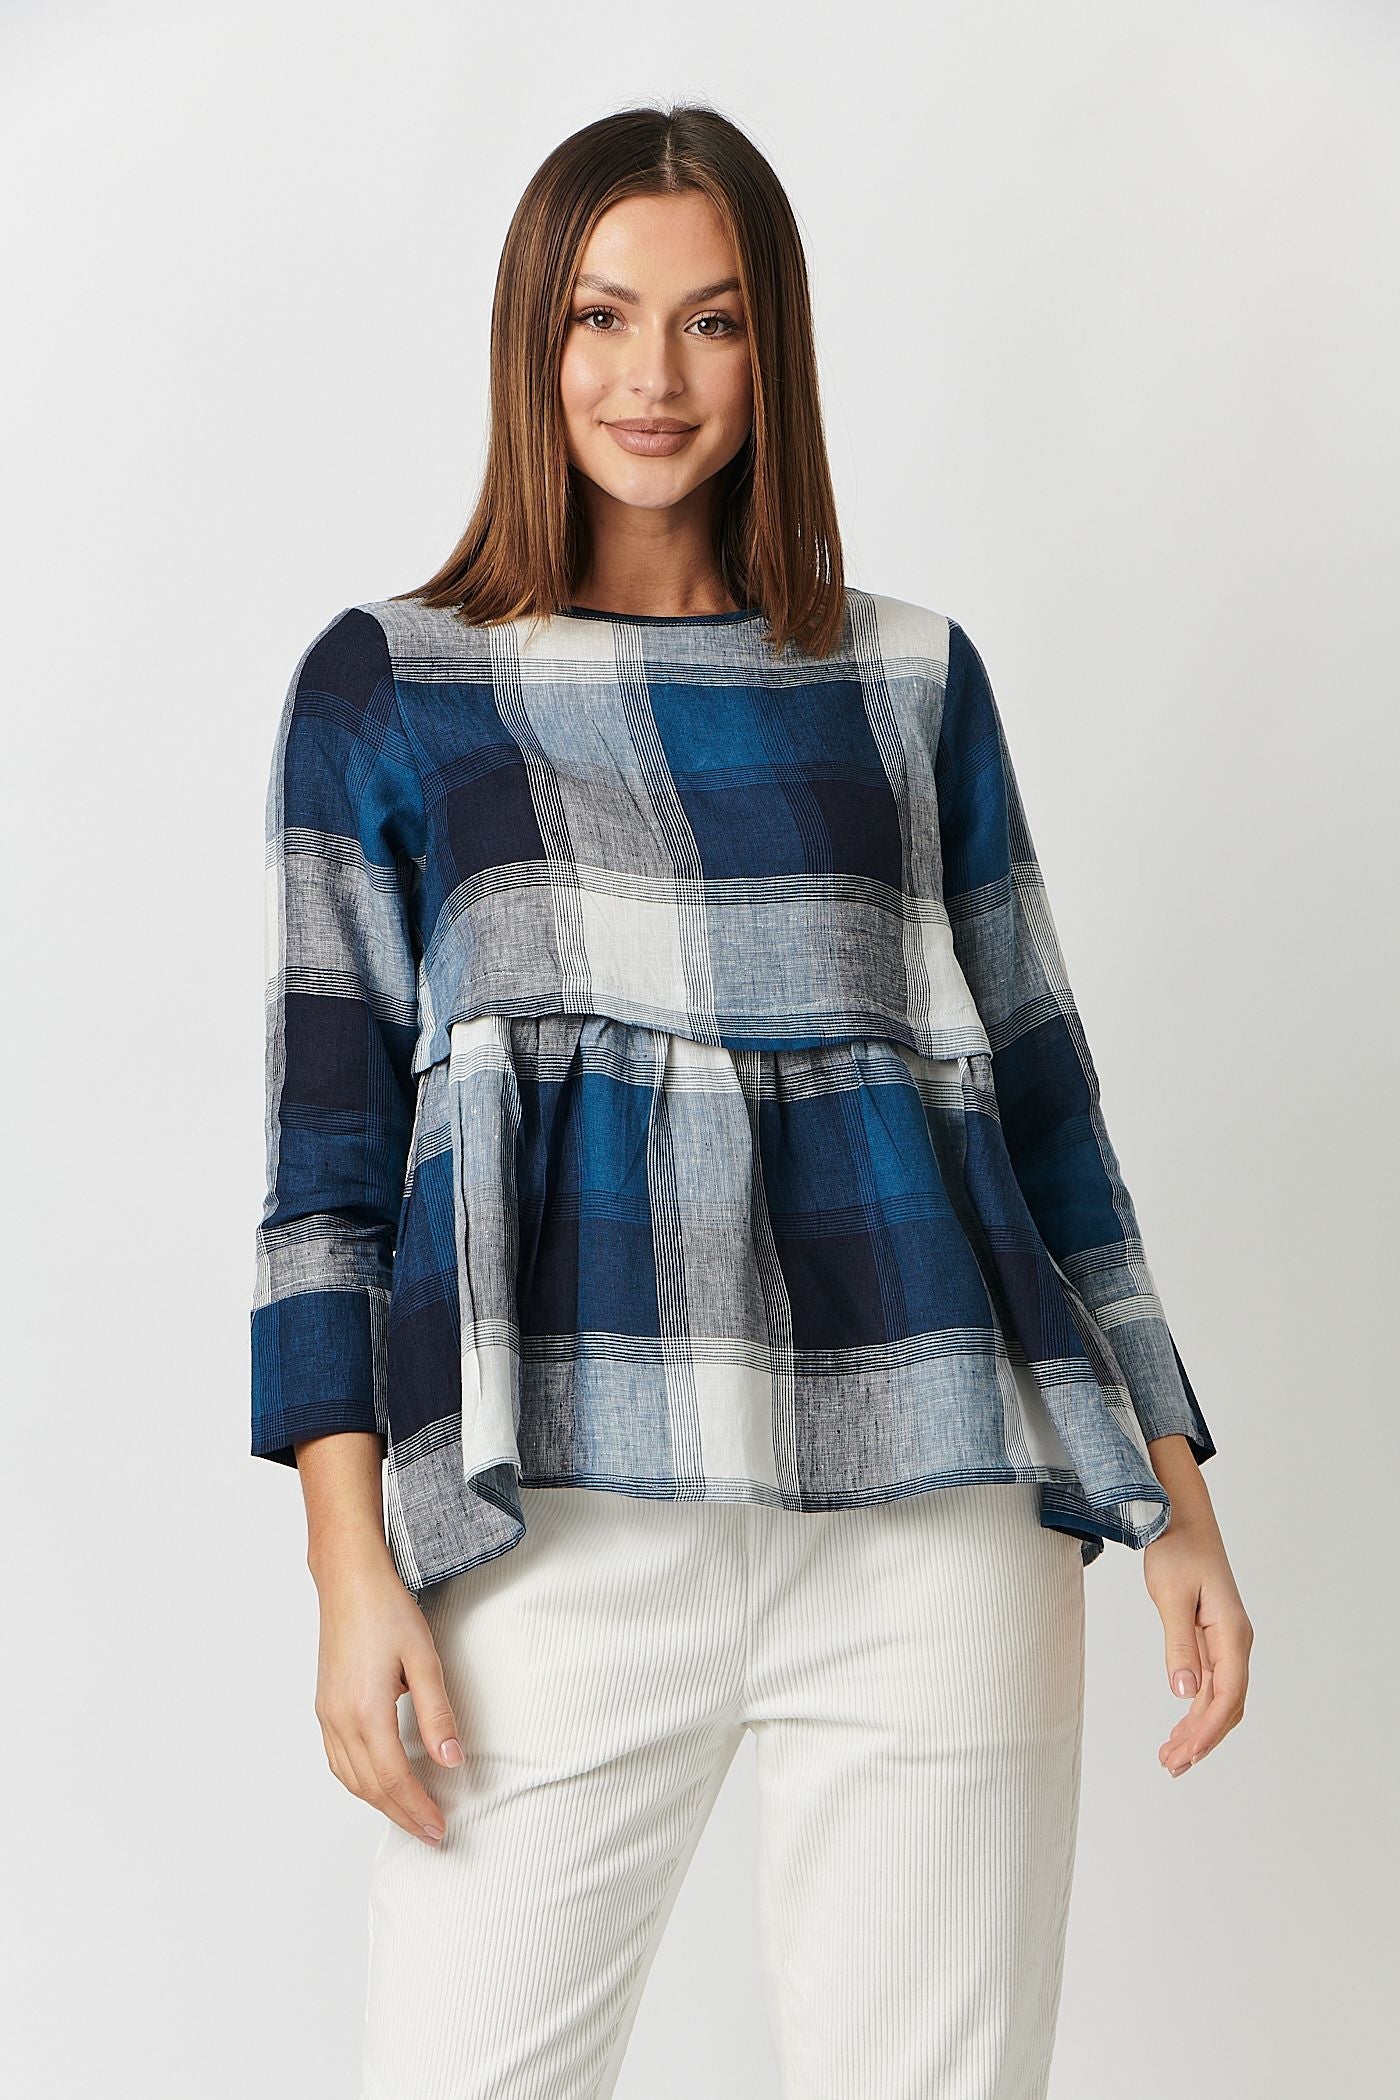 Naturals by O & J Frill Bottom Top in Lagoon Plaid